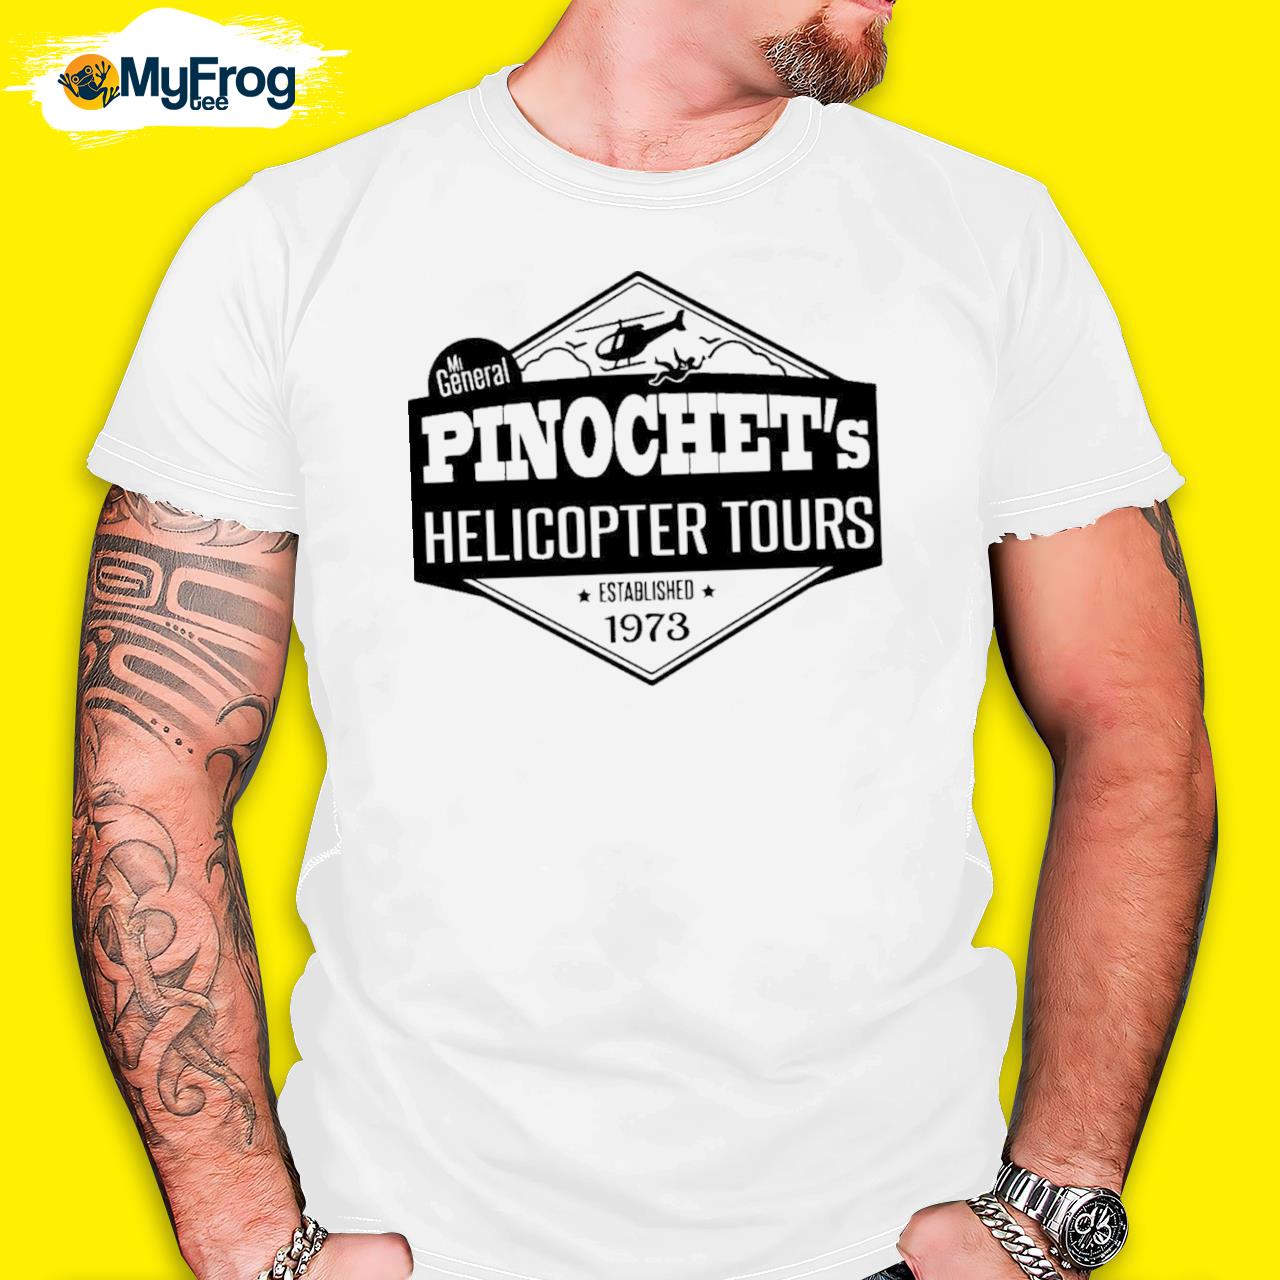 MI general pinochet's helicopter tours established 1973 shirt